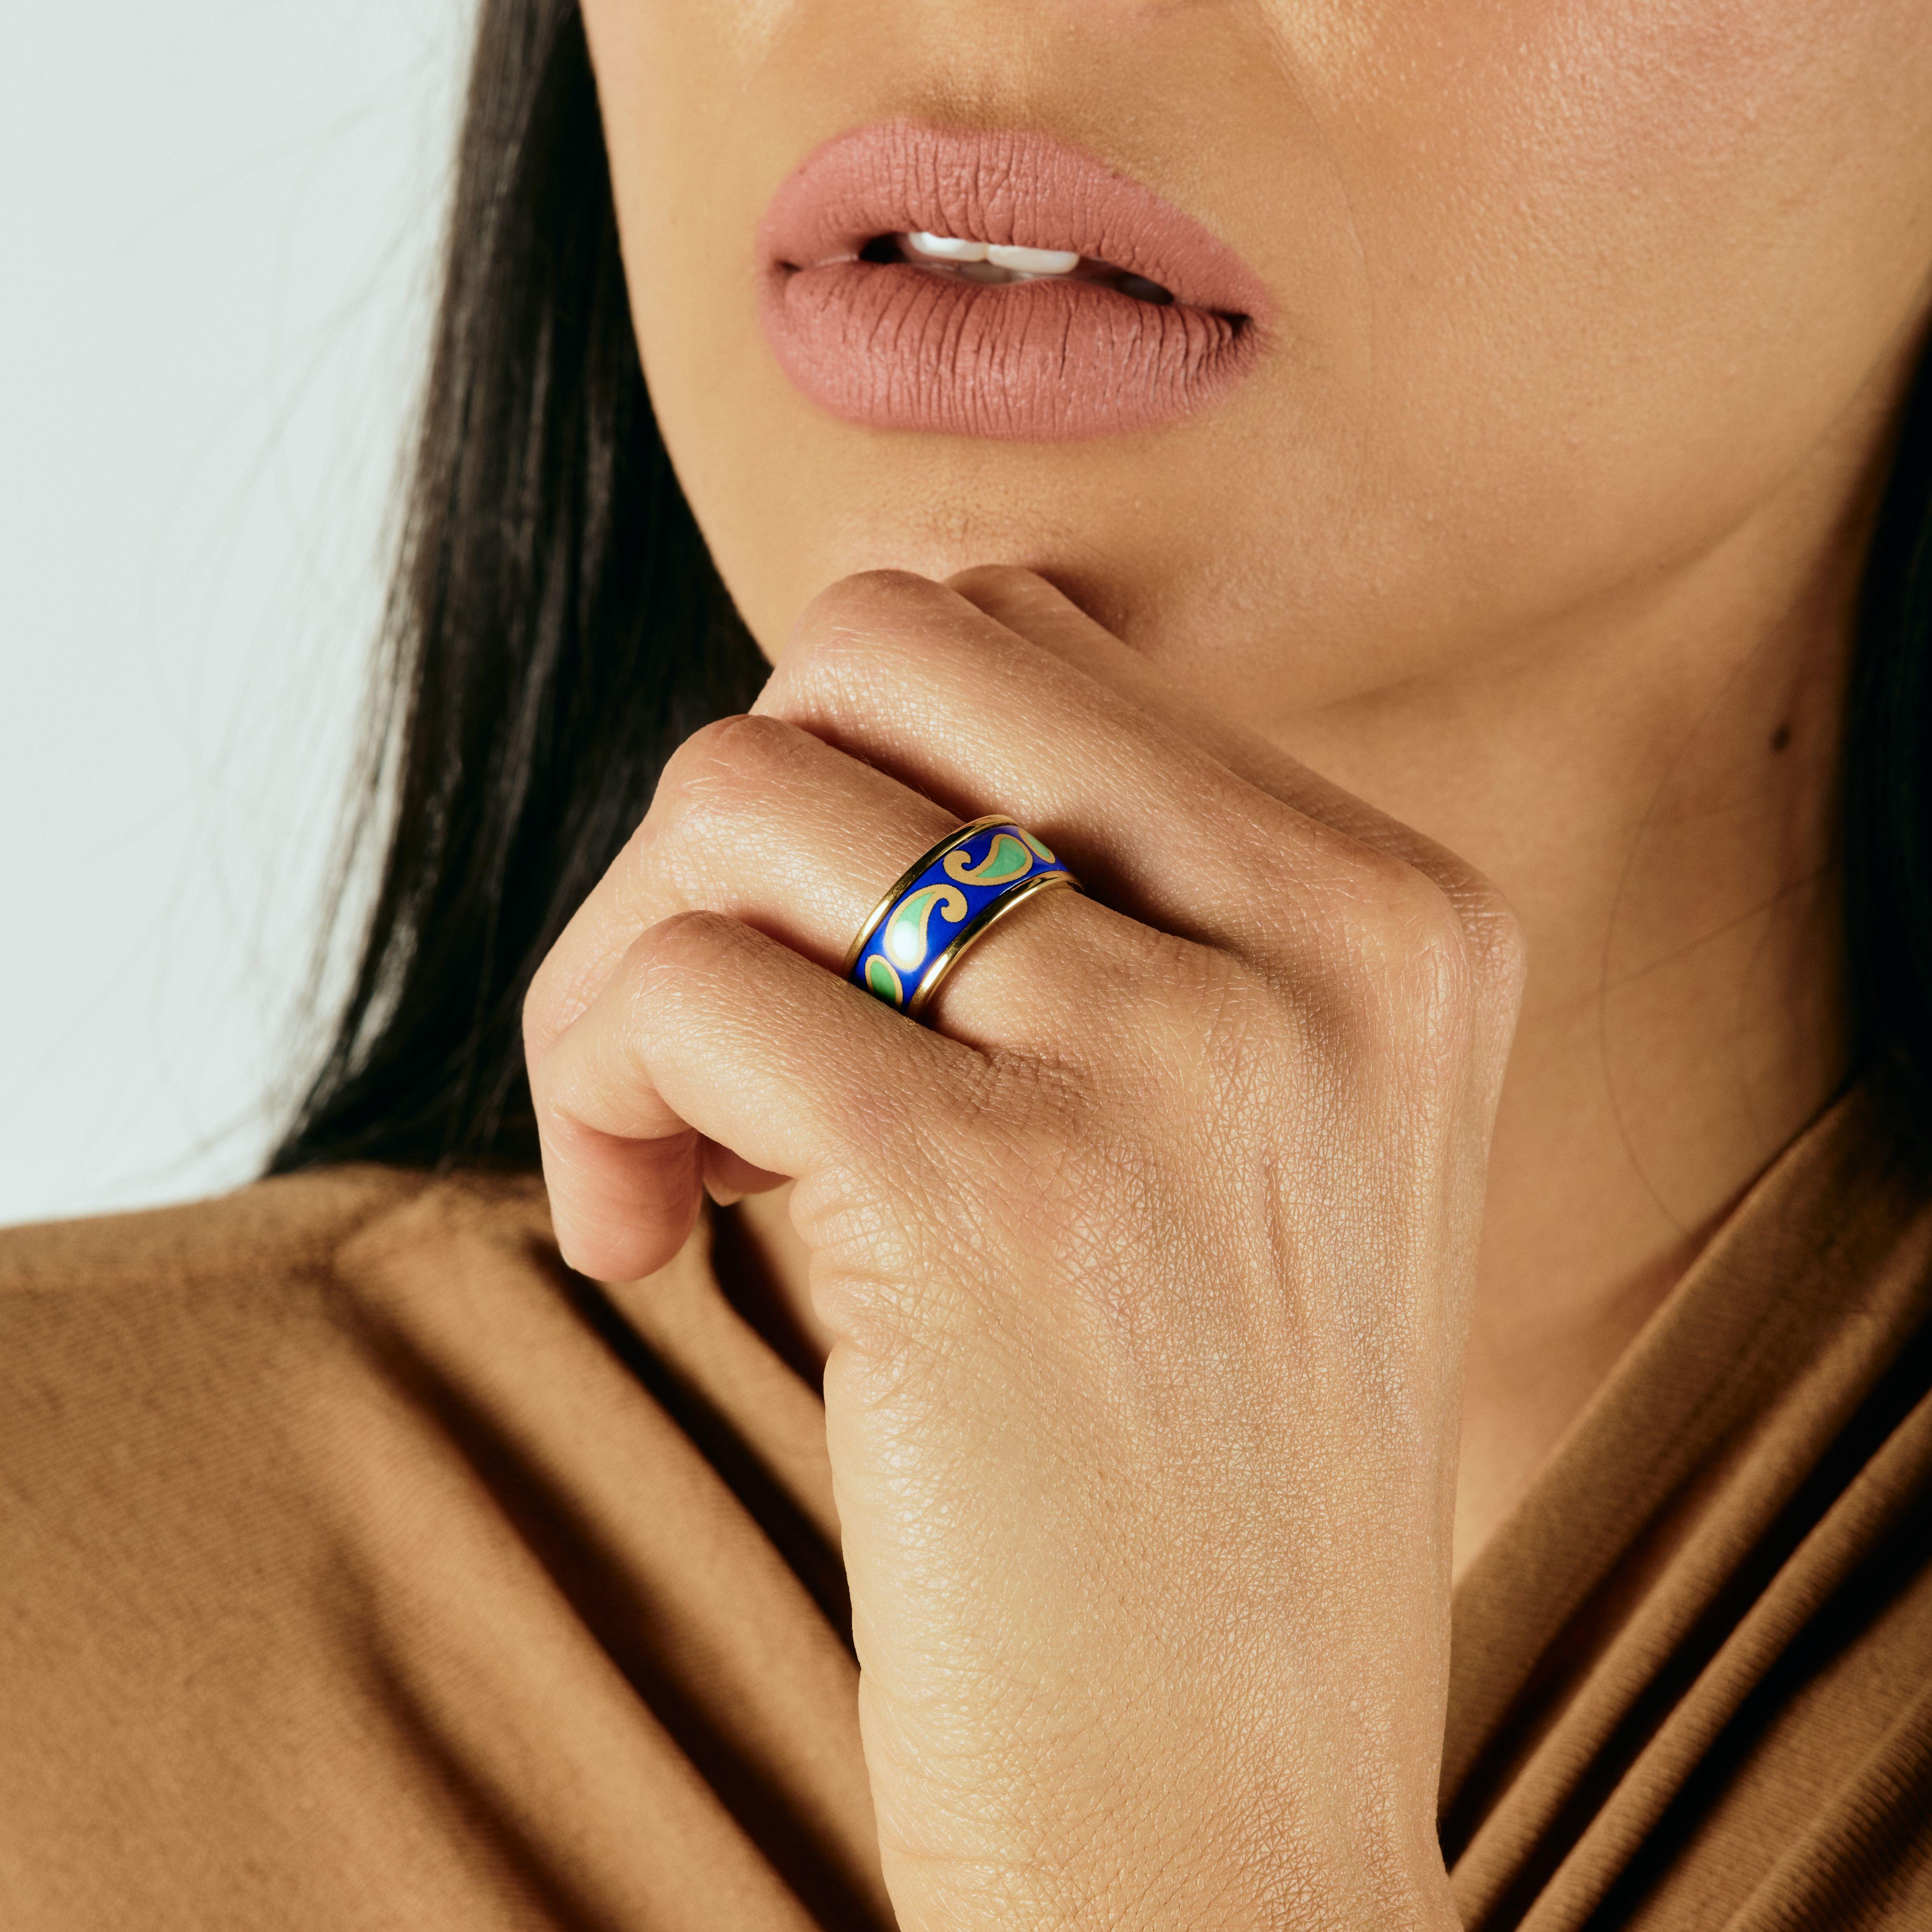 Introducing the Eternity Ring. Experience pure luxury with our 18k gold-plated stainless steel rings. Hand-painted with captivating fire enamel, these exquisite rings are designed to make a statement. Hypoallergenic and made to last, they are a